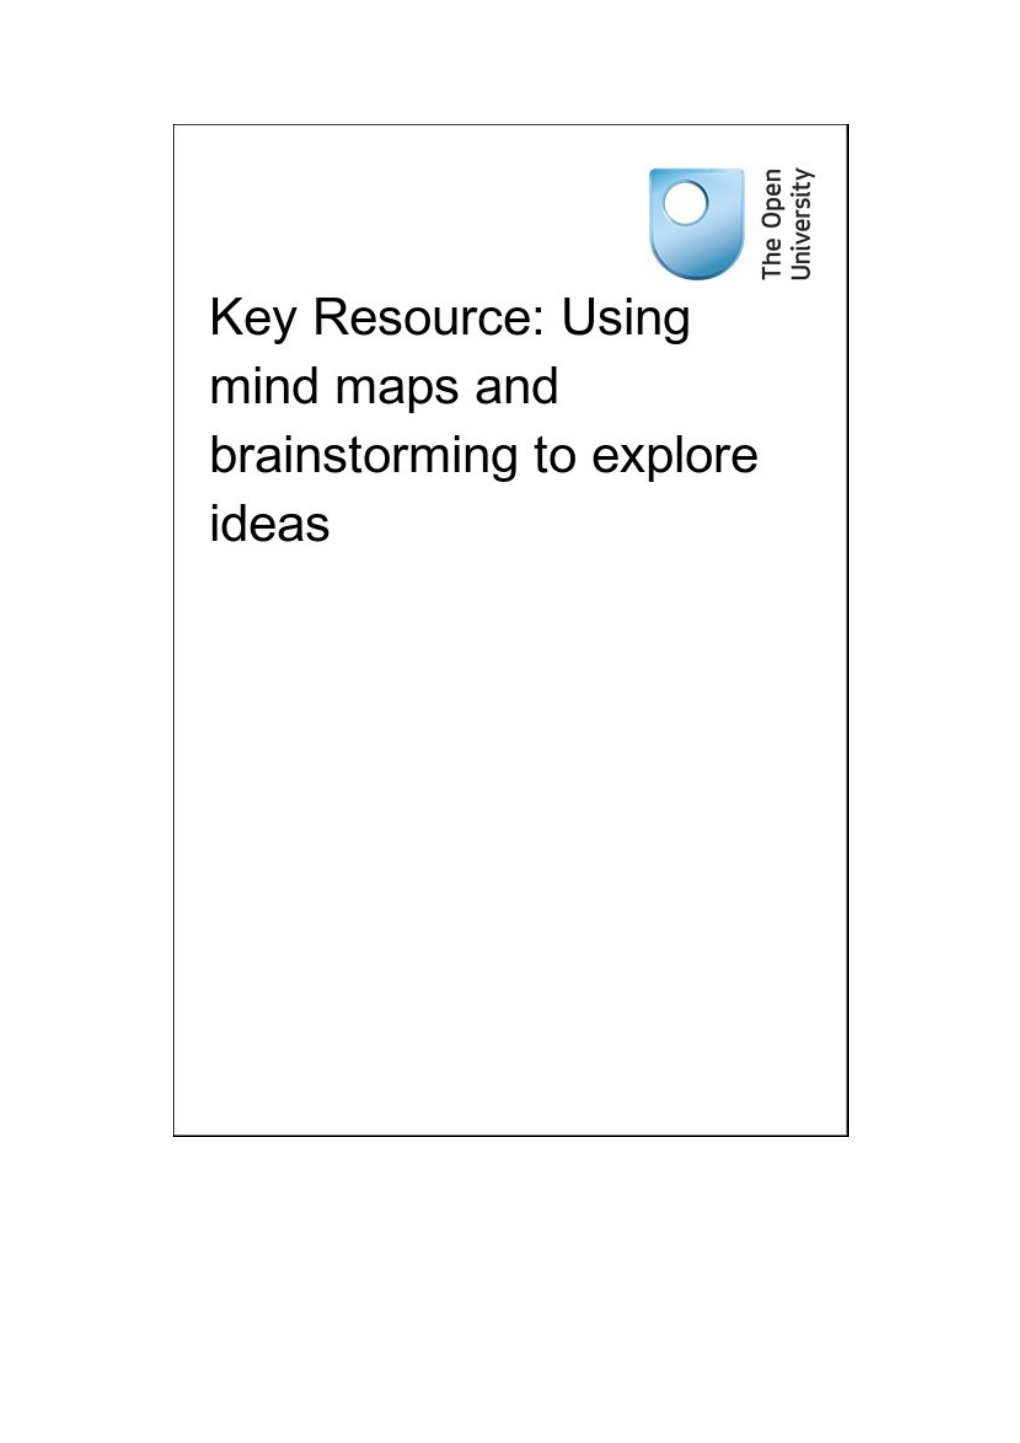 Key Resource: Using Mind Maps and Brainstorming to Explore Ideas